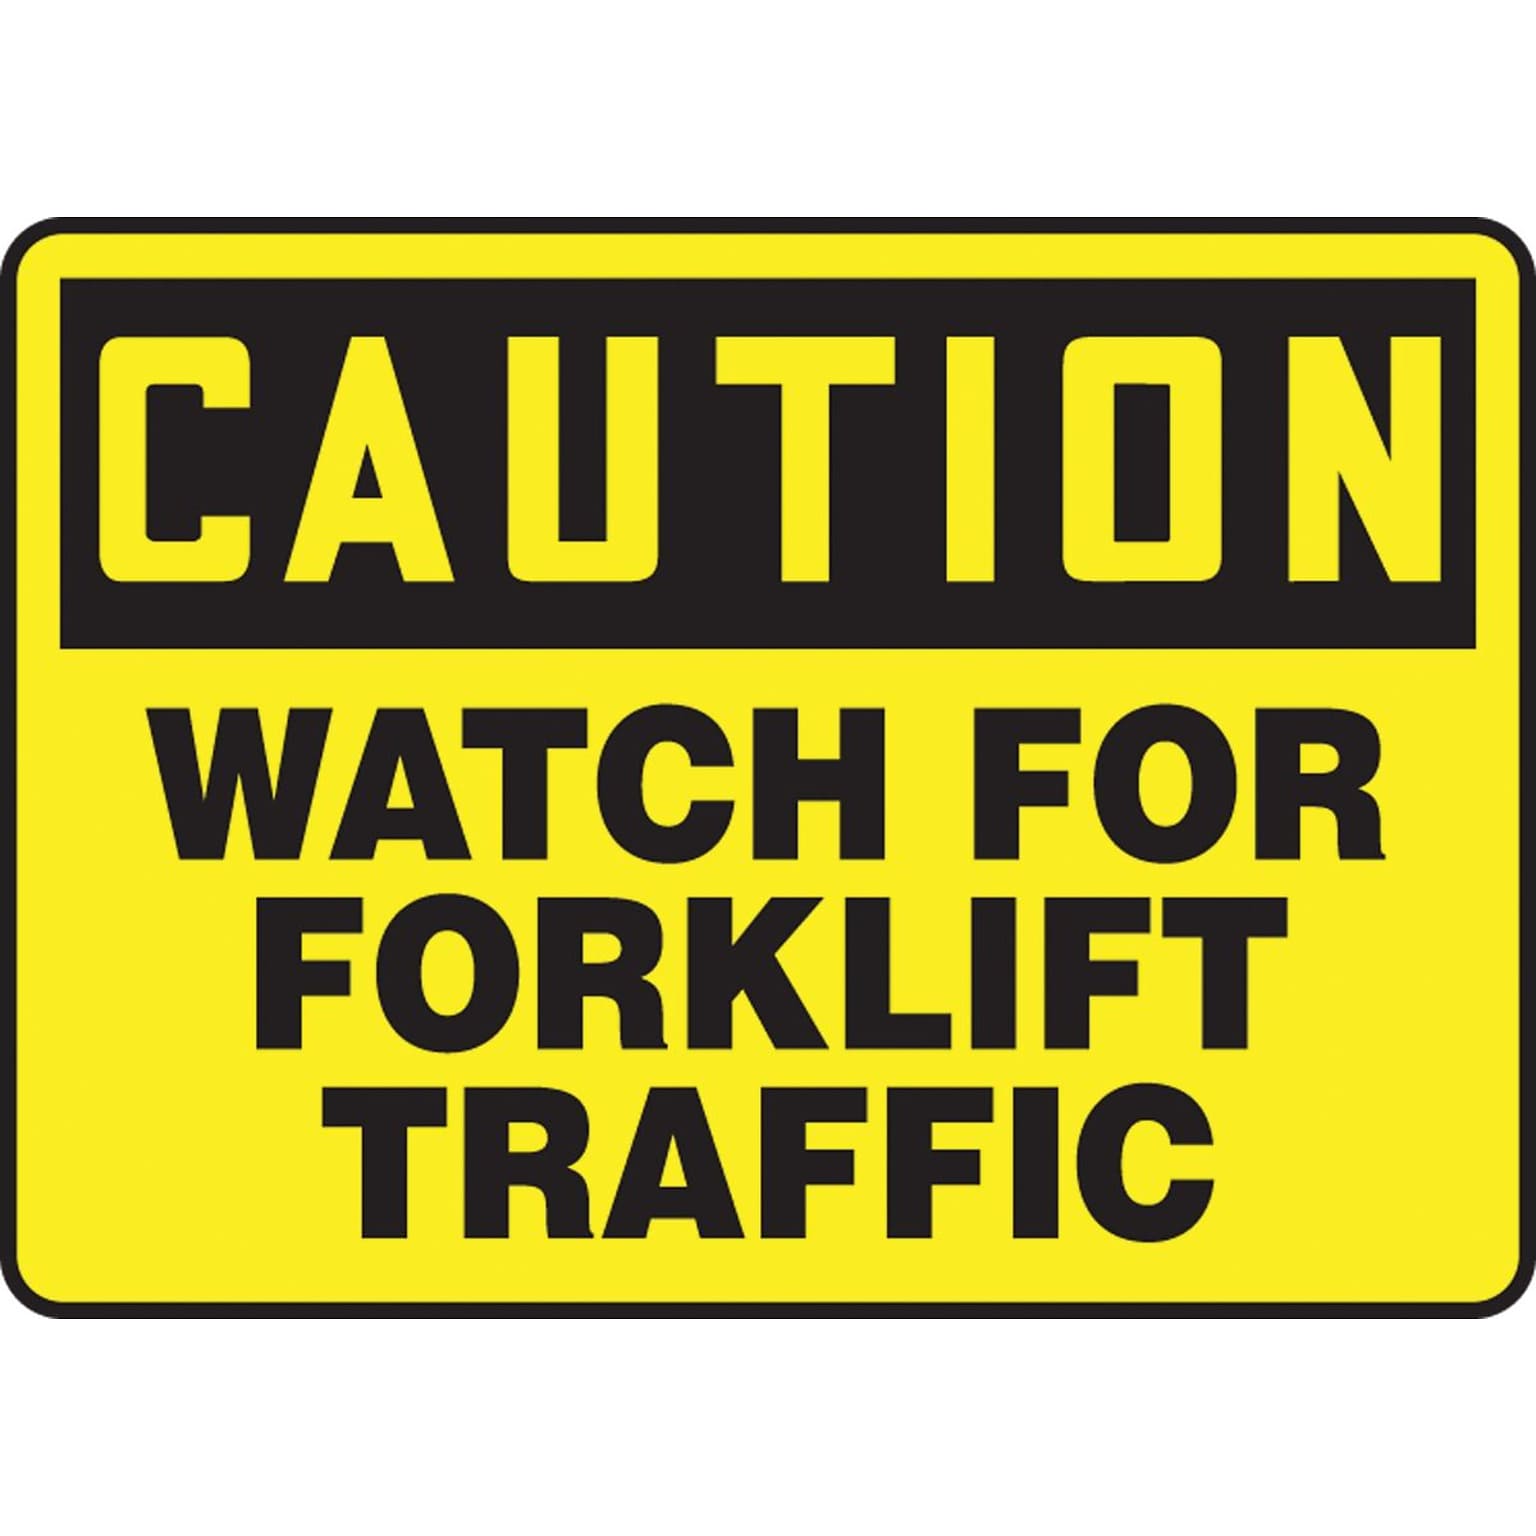 Accuform 7 x 10 Aluminum Safety Sign CAUTION WATCH FOR FORKLIFT TRAFFIC, Black On Yellow (MVHR631VA)